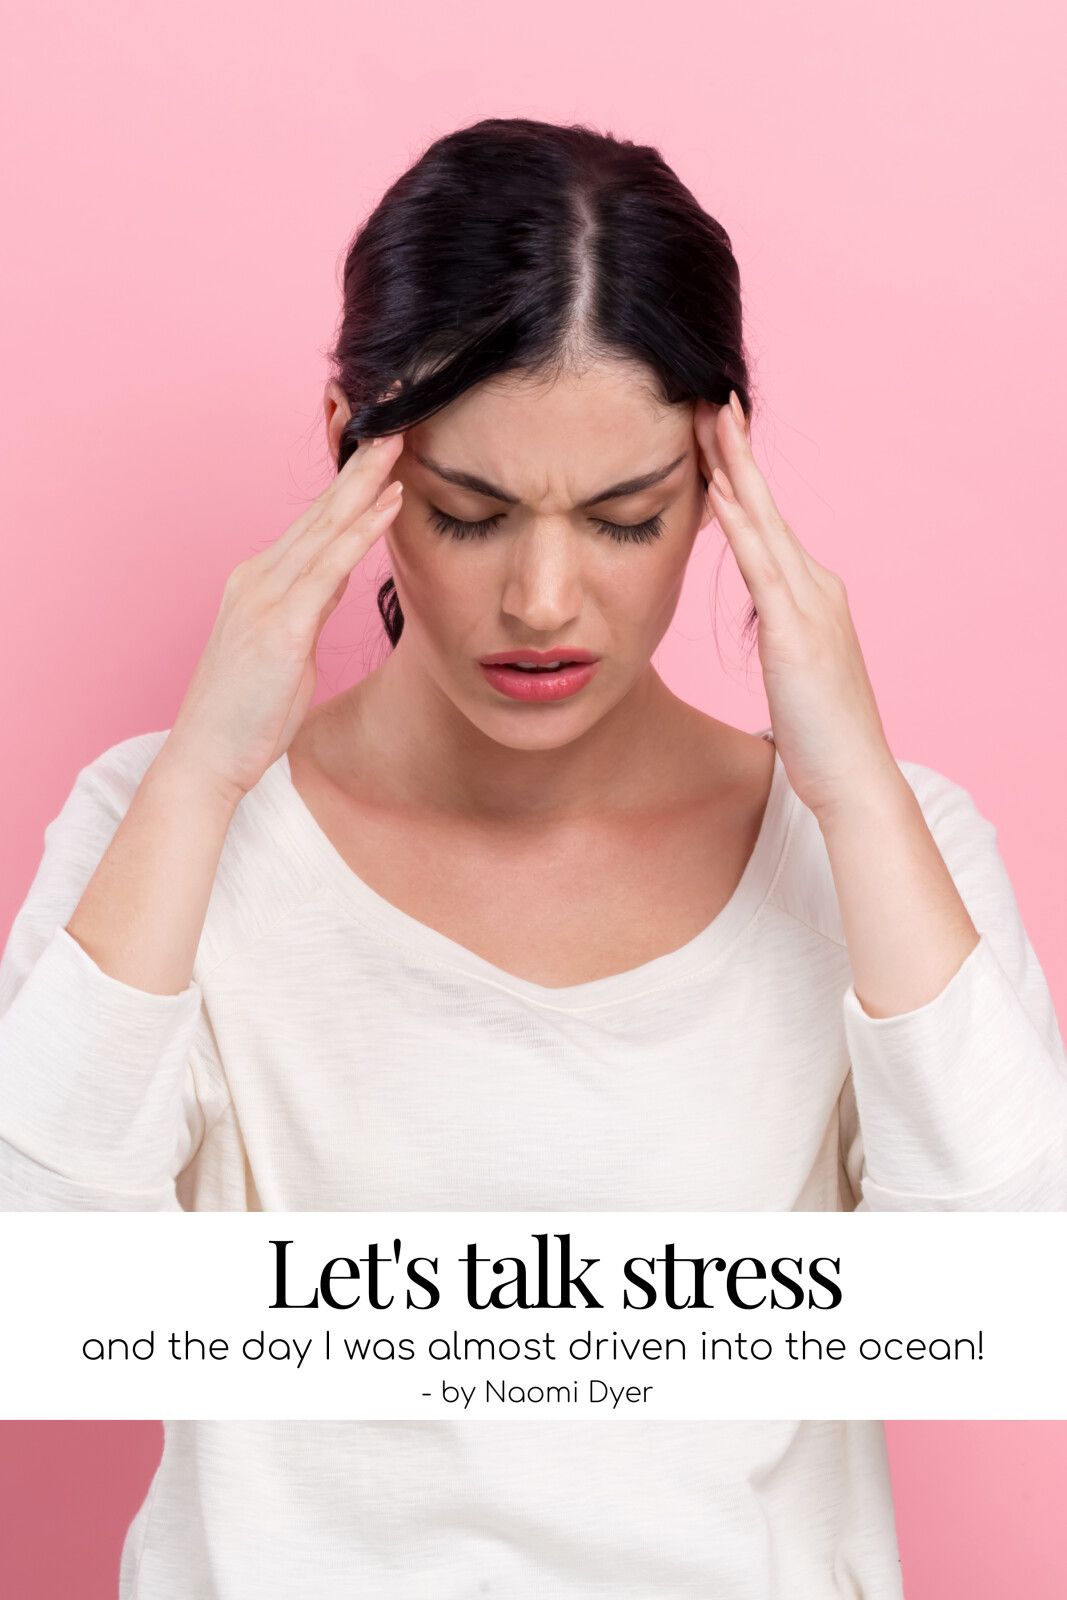 Let's talk stress - and the day I was almost driven into the ocean!